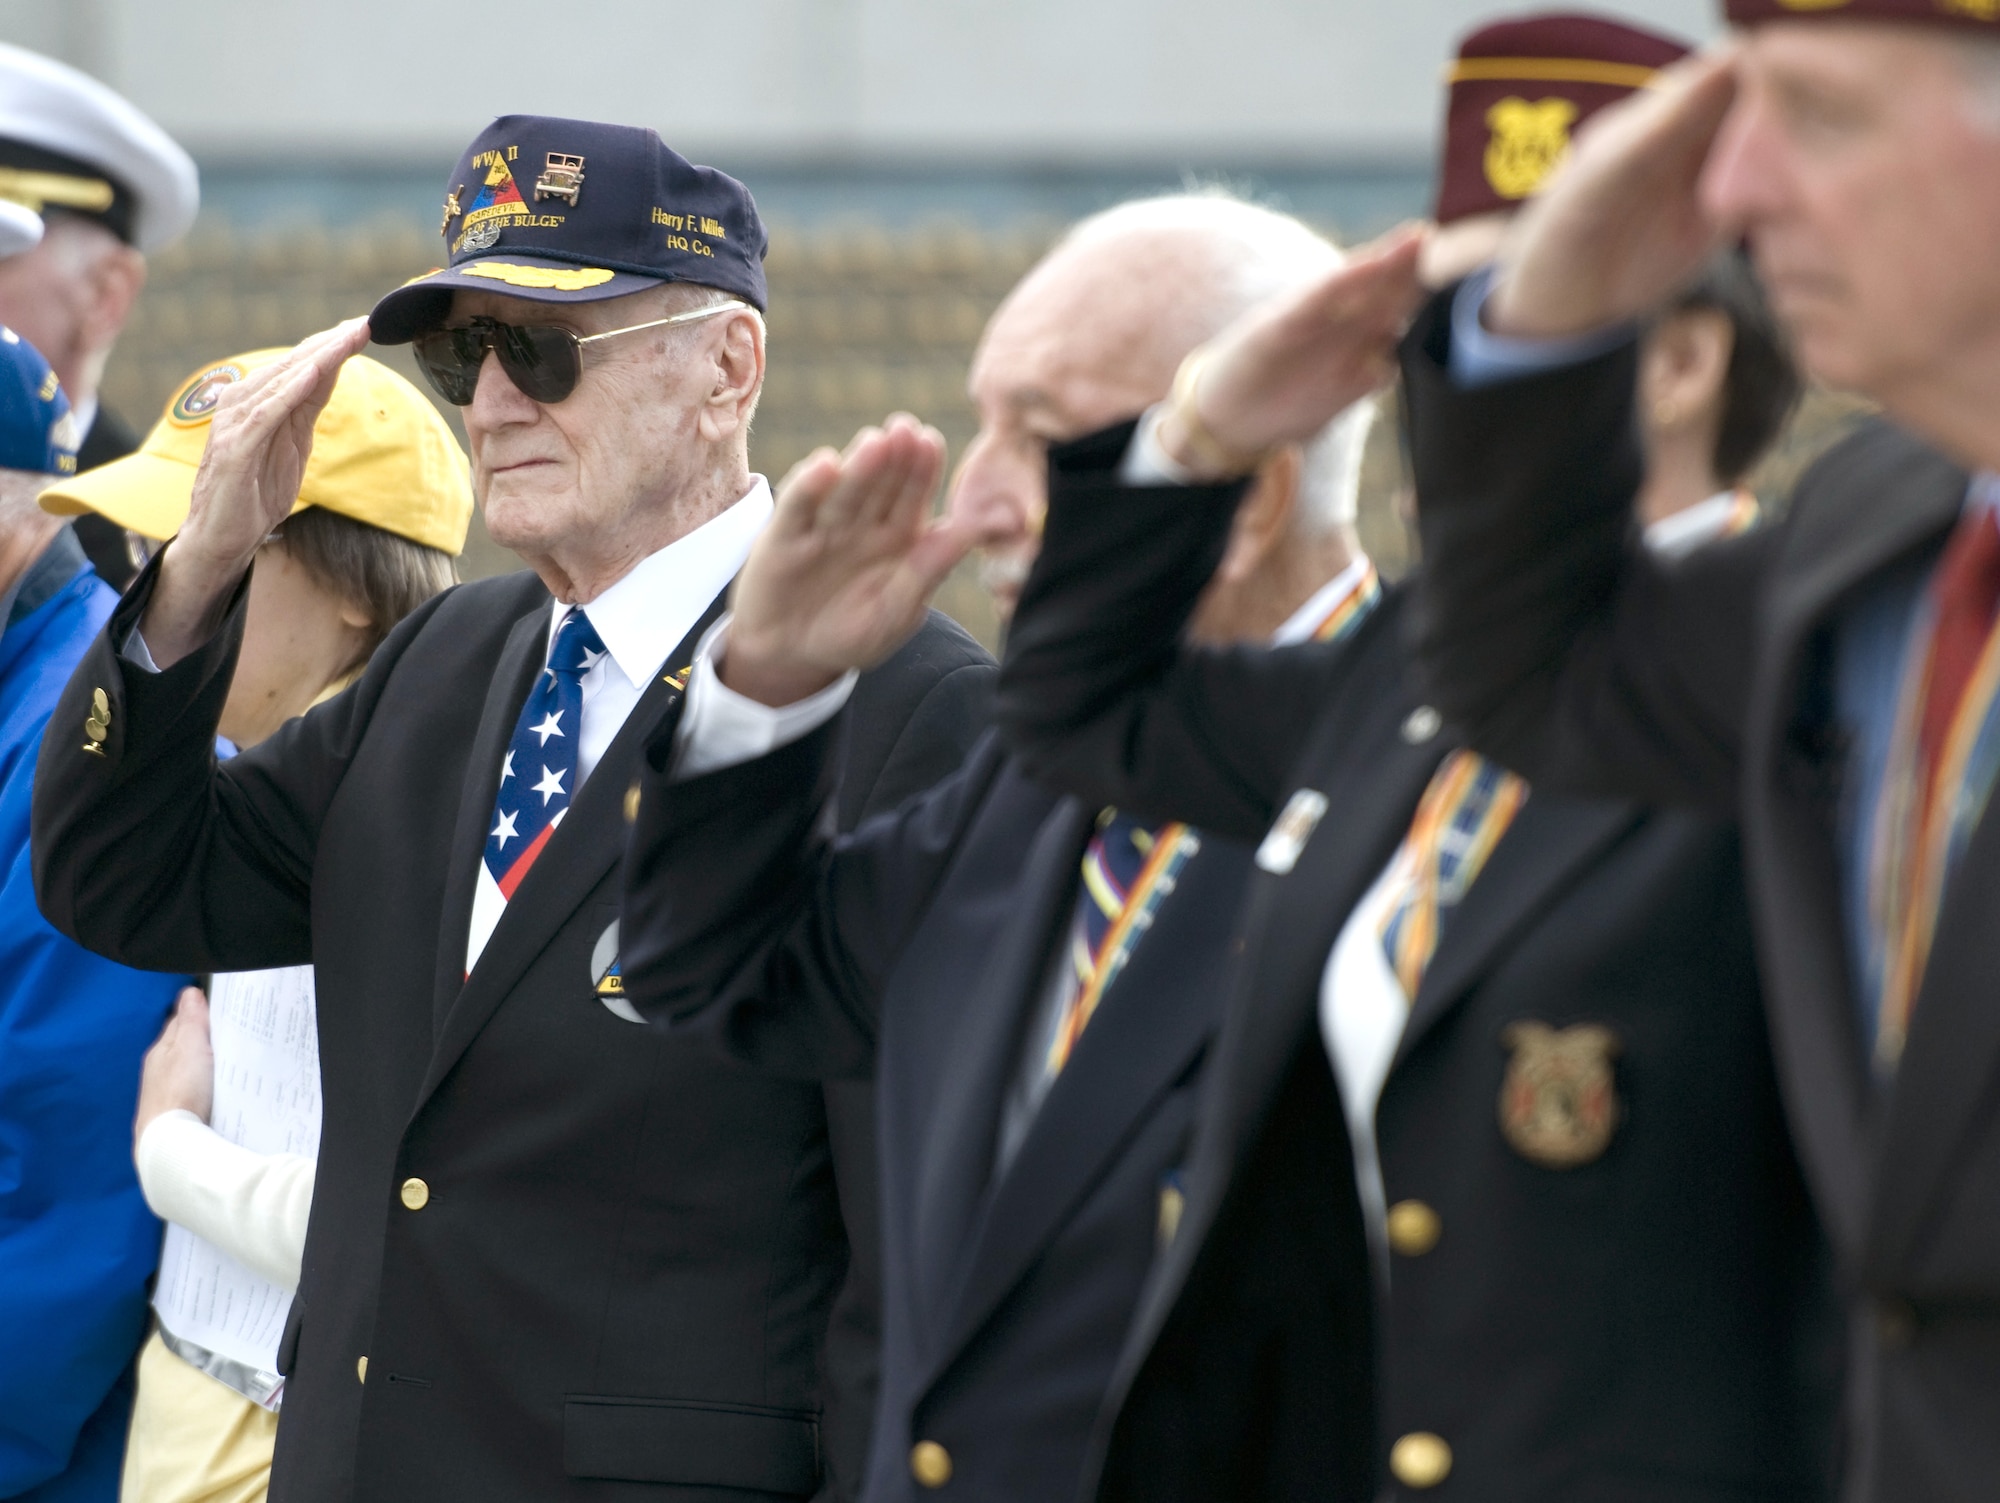 Veterans render a salute after laying wreaths during a Pearl Harbor remembrance ceremony at the National World War II Memorial on Dec. 7, 2015, in Washington, D.C. (U.S. Air Force photo/Sean Kimmons)